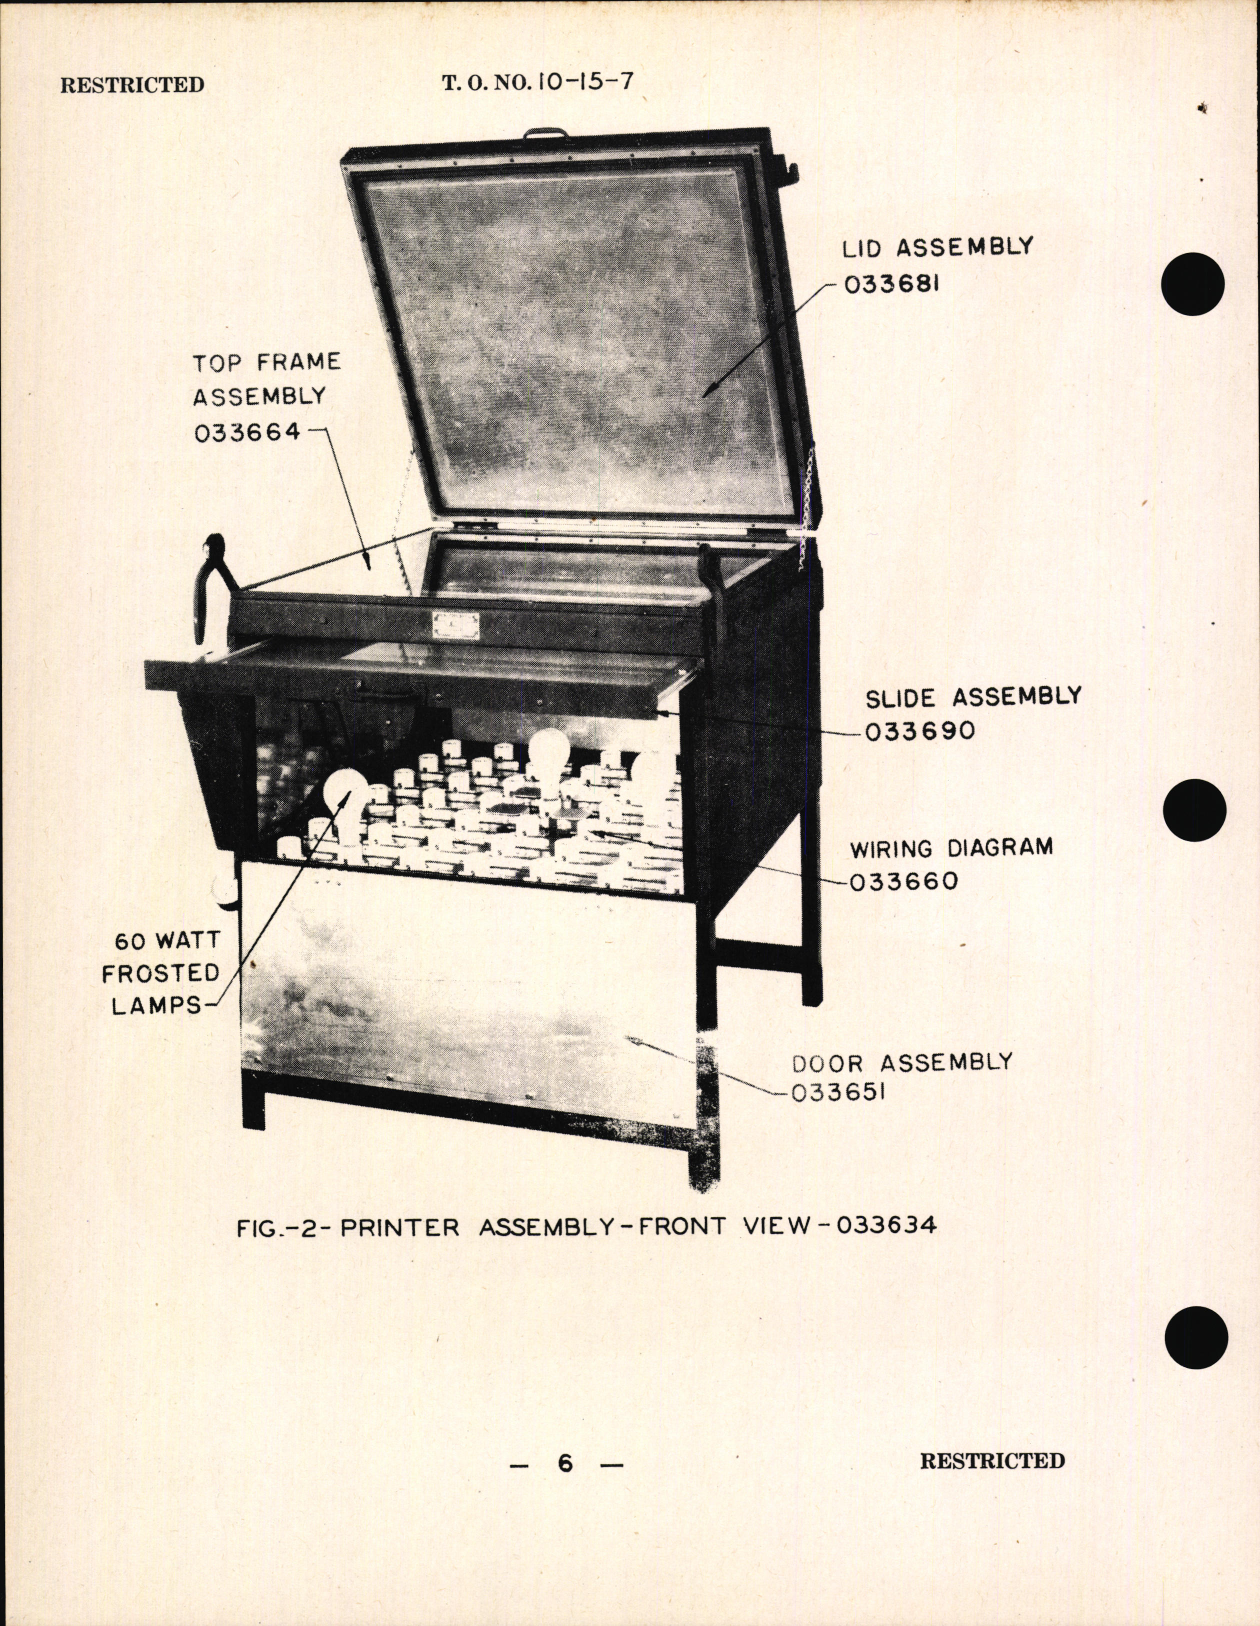 Sample page 8 from AirCorps Library document: Handbook of Instructions with Parts Catalog for Type A-2 Printer Contact Assembly